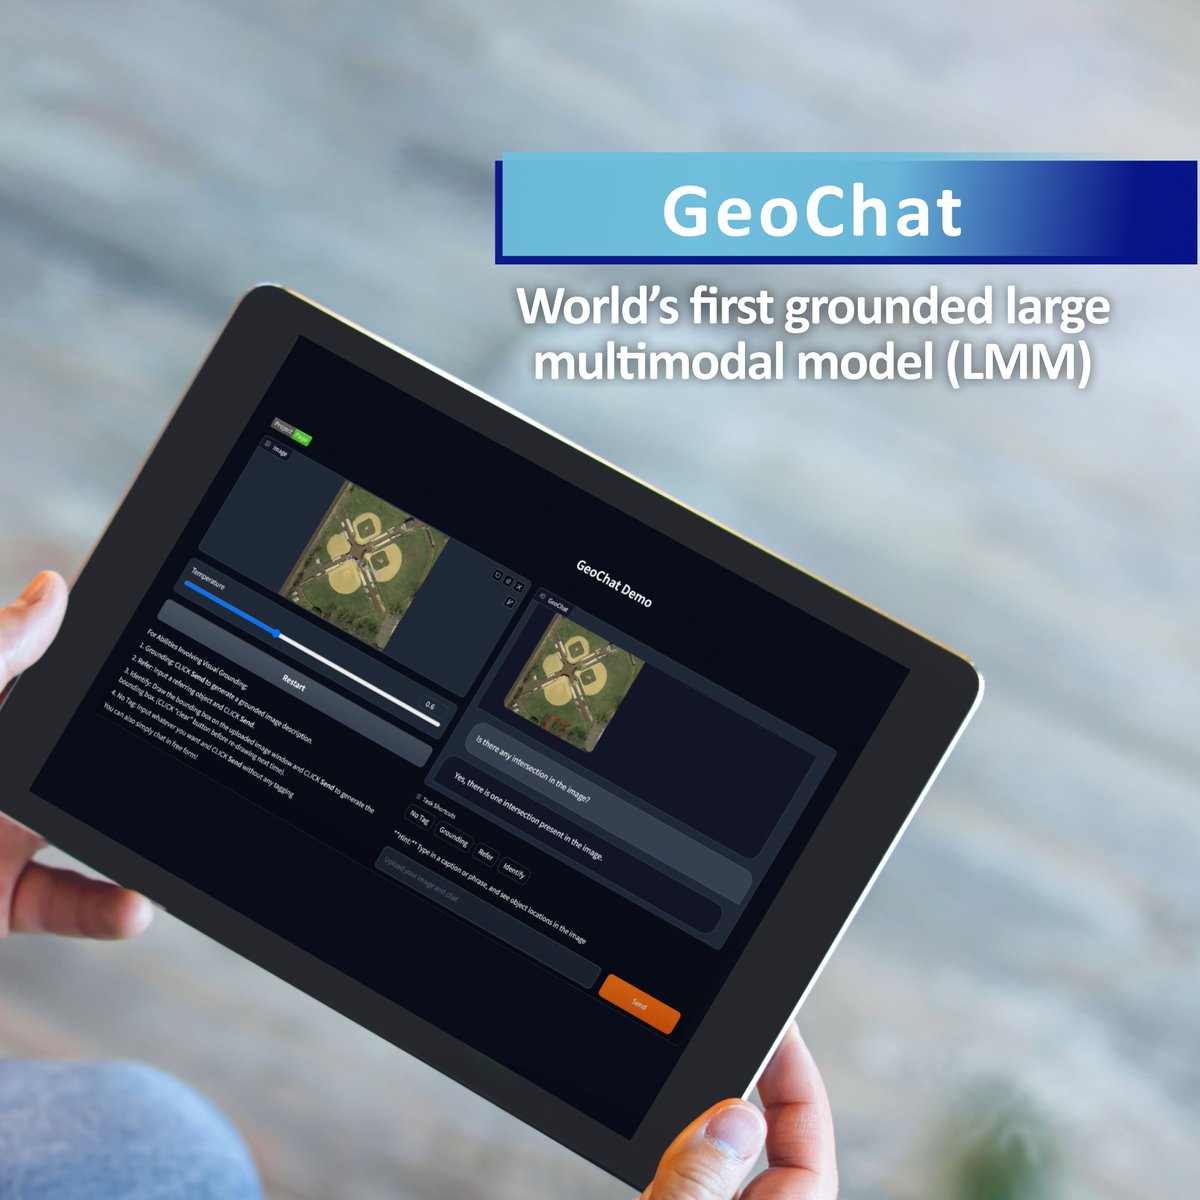 MBZUAI introduces the world's first grounded large multimodal model (#LMM), GeoChat, which is tailor-made for remote sensing (RS) scenarios. GeoChat transforms remote sensing by analyzing detailed images with advanced regional reasoning and sets new standards in RS #AI with…